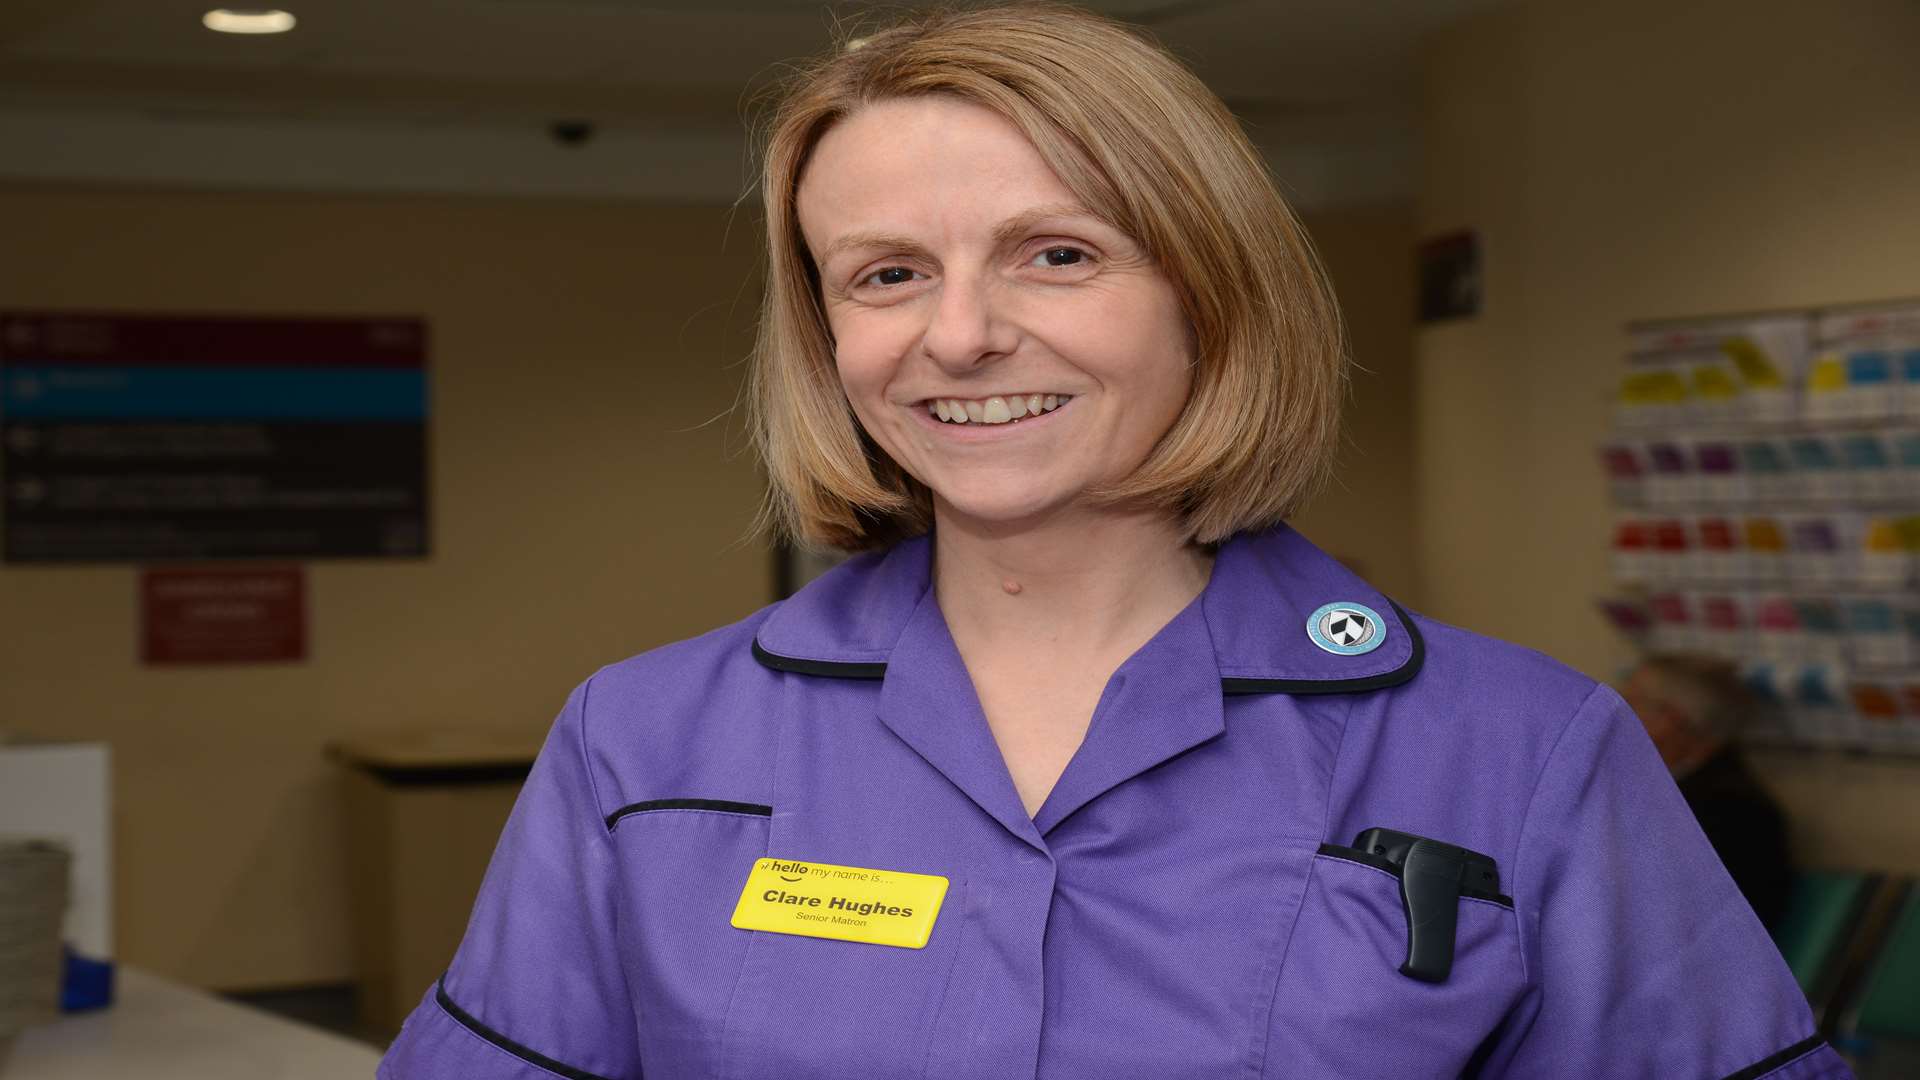 Clare Hughes is the Senior Matron in the Emergency Department